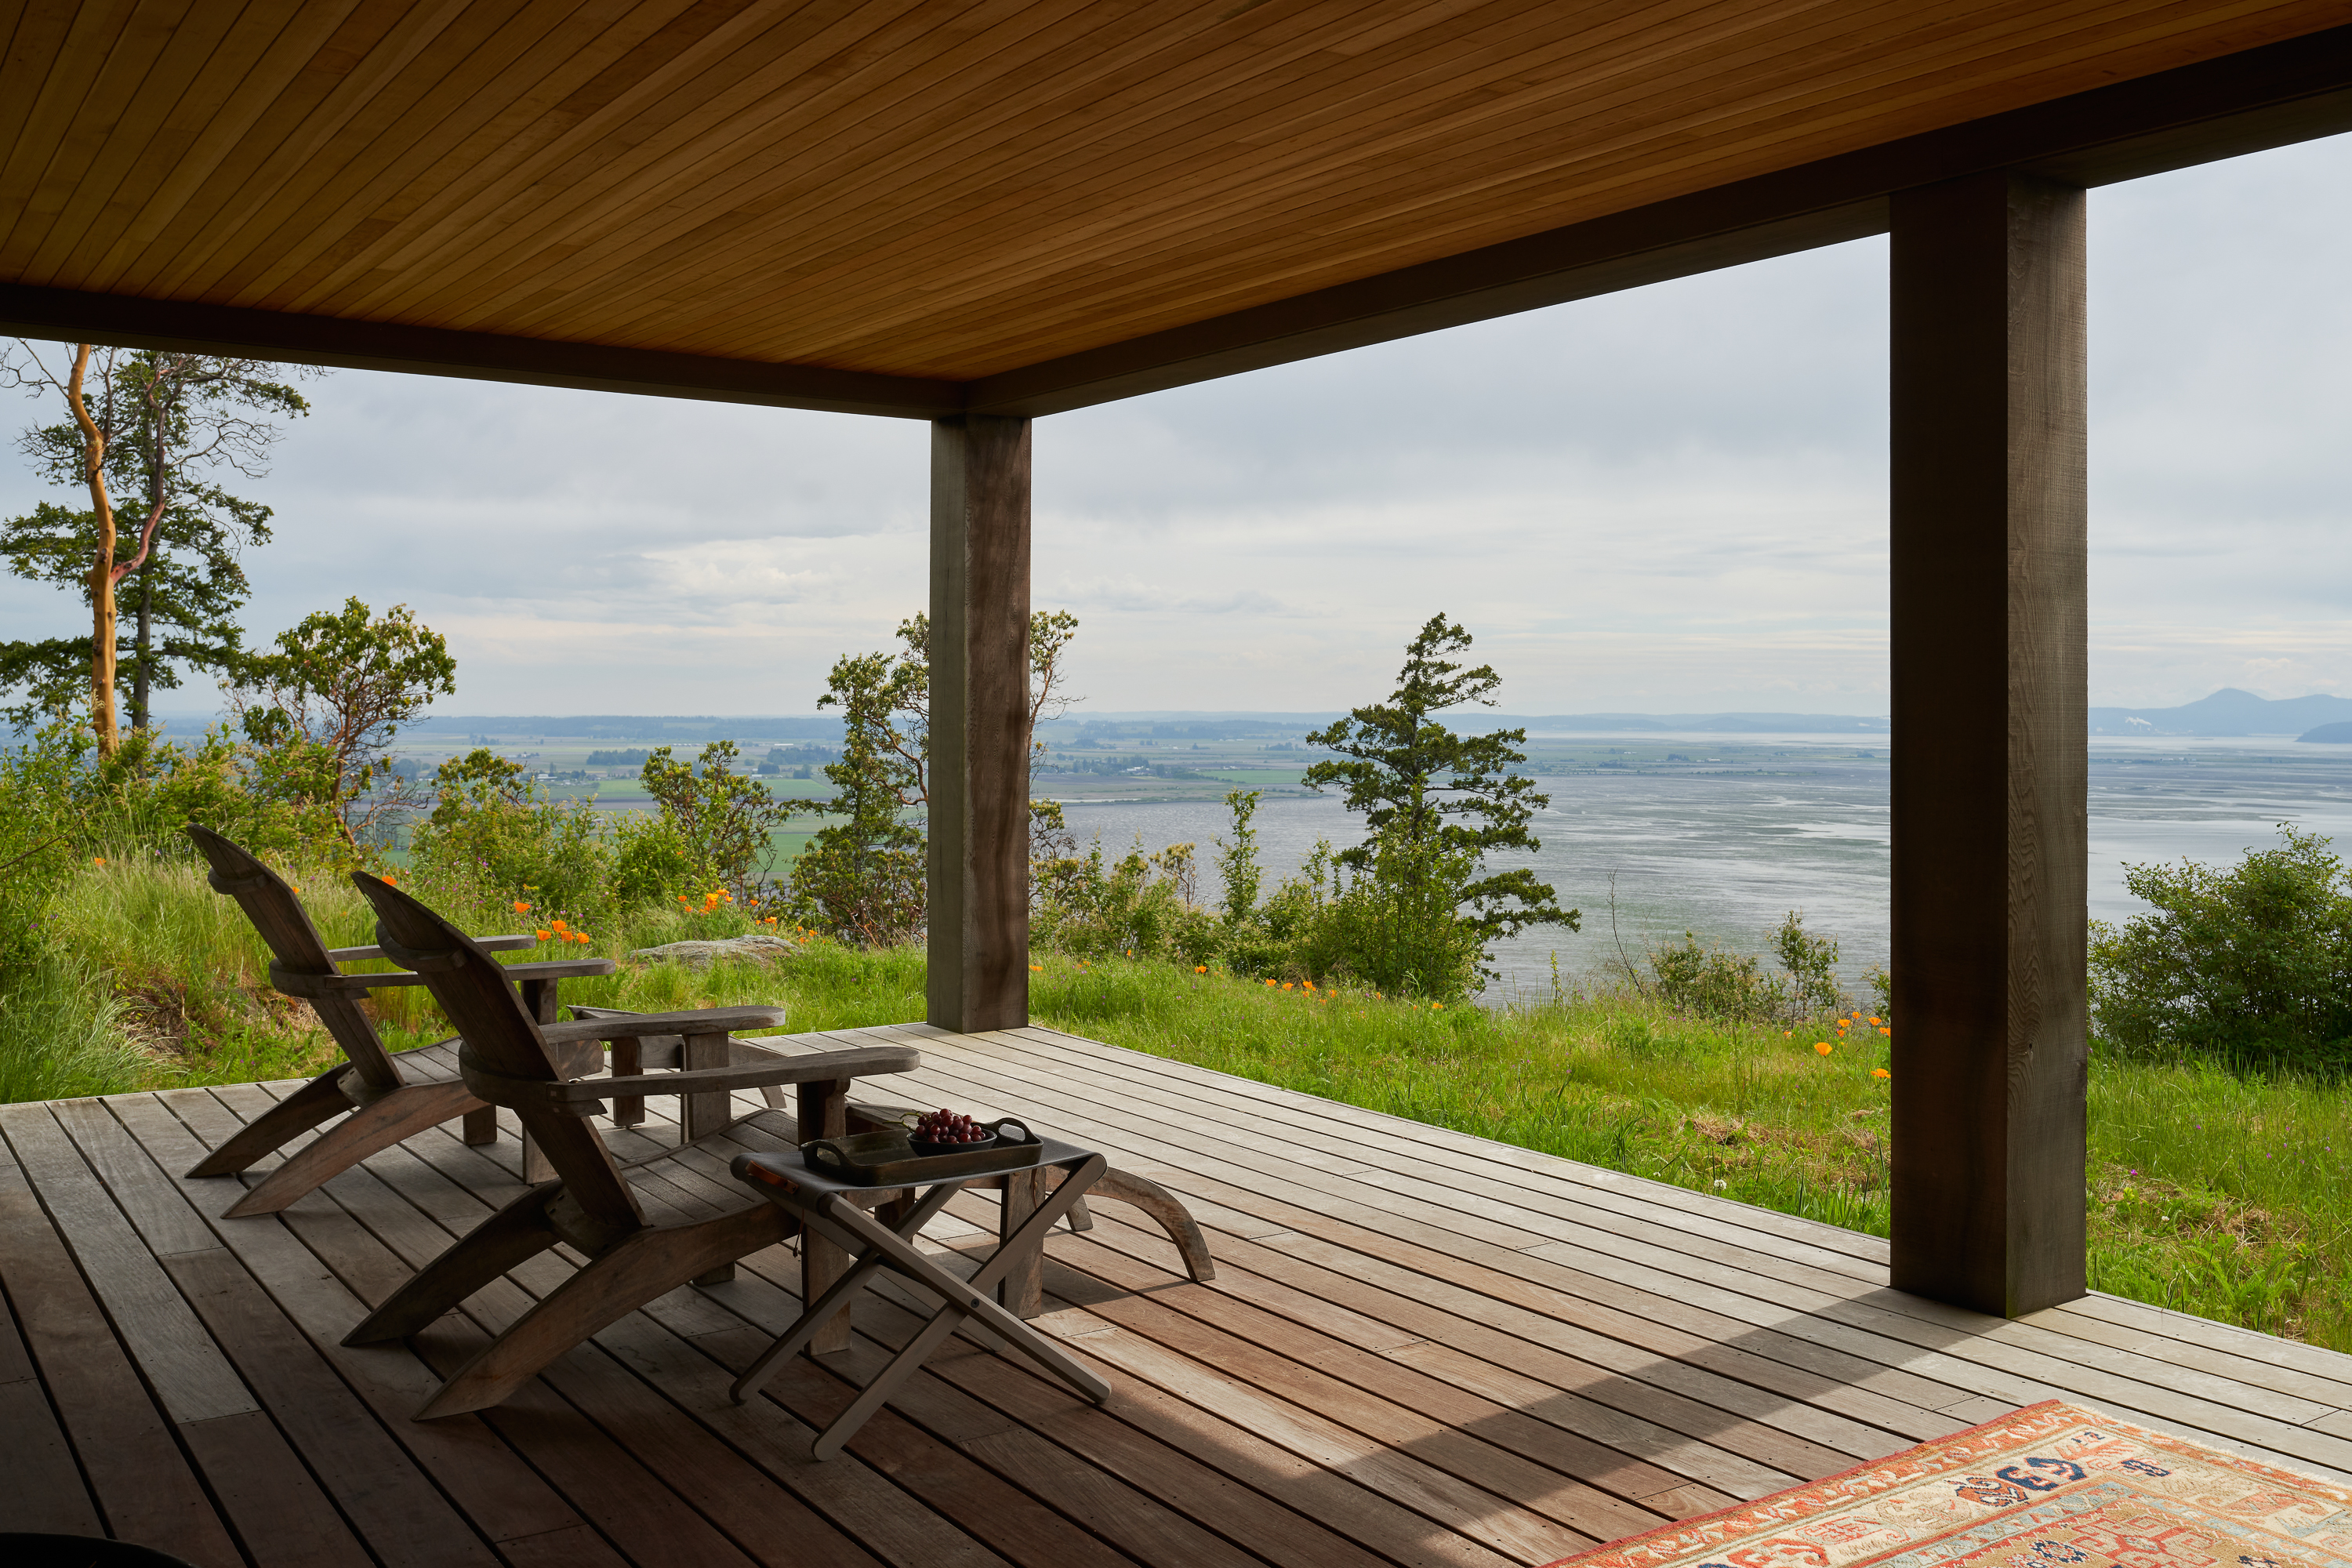 Covered porch with a view of the Puget Sound.